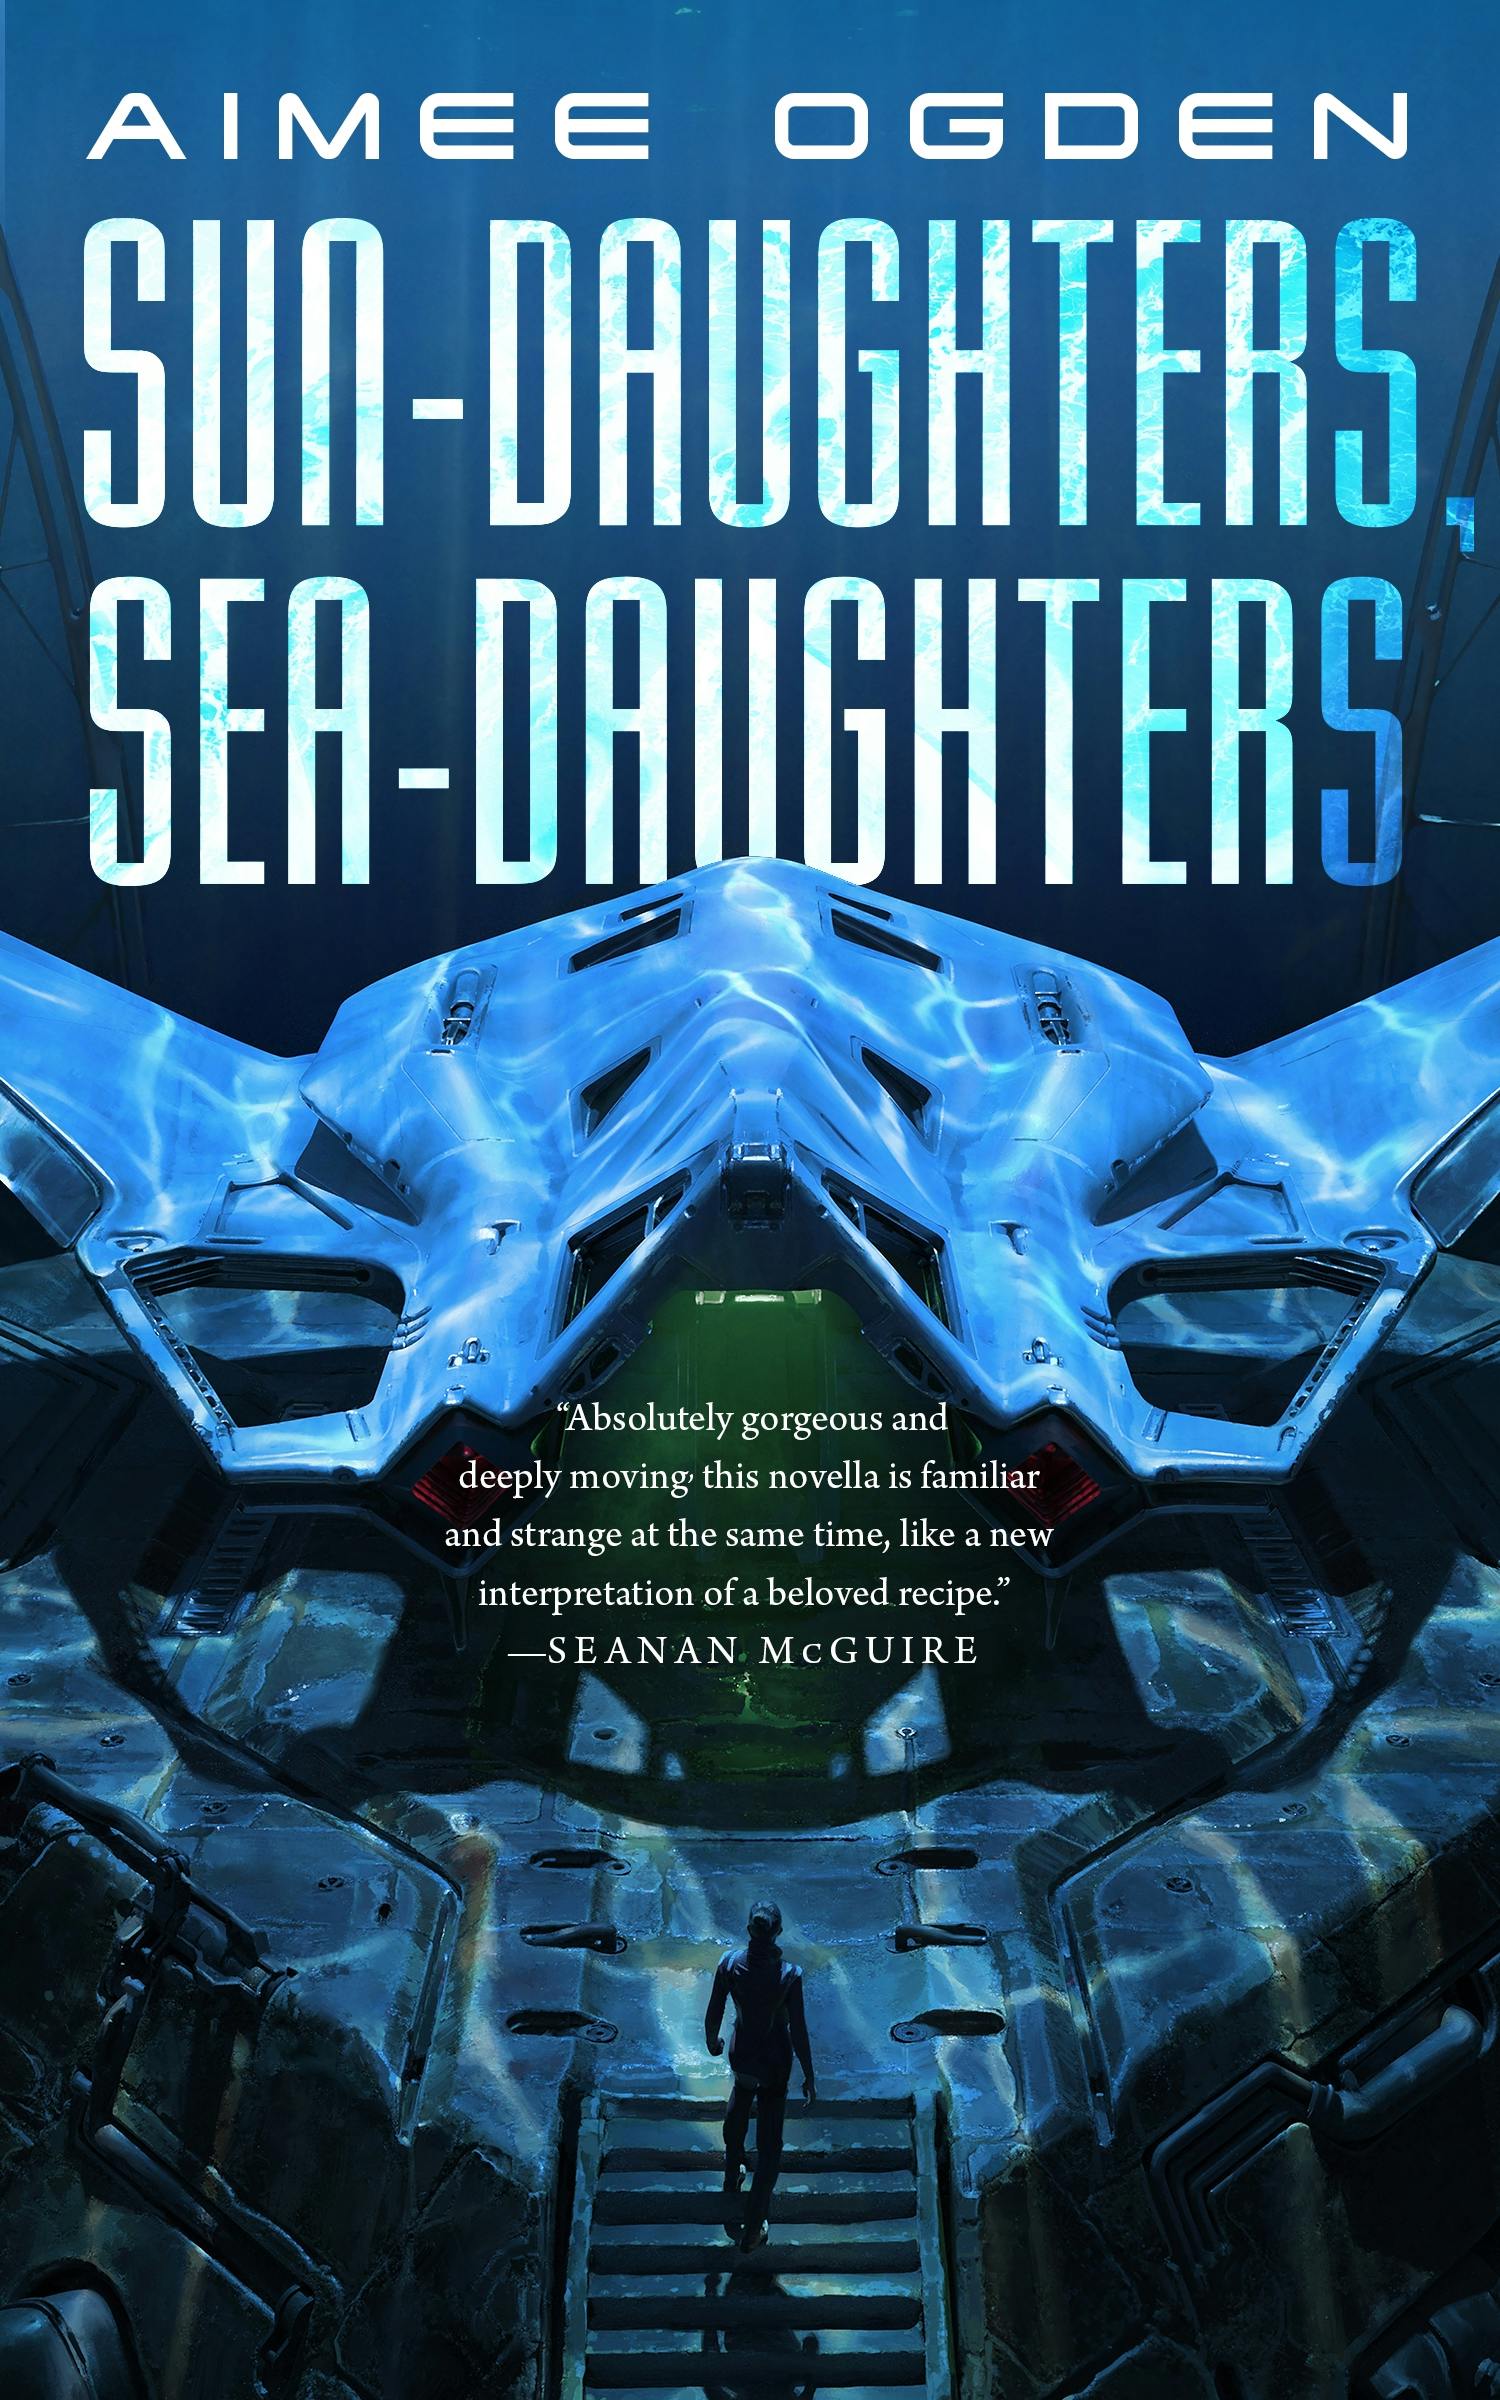 Cover for the book titled as: Sun-Daughters, Sea-Daughters